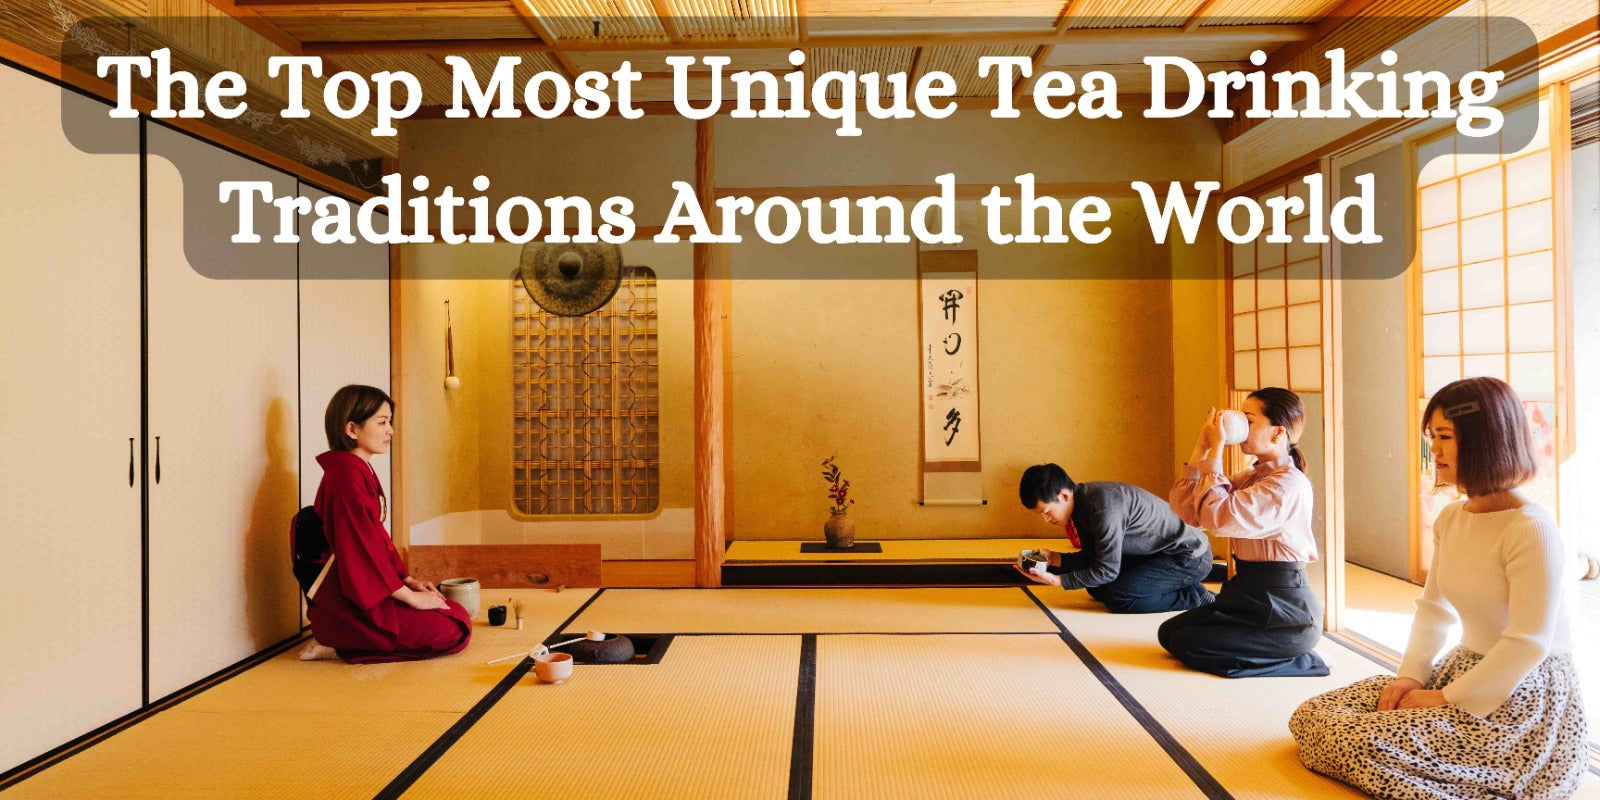 The Top Most Unique Tea Drinking Traditions Around the World